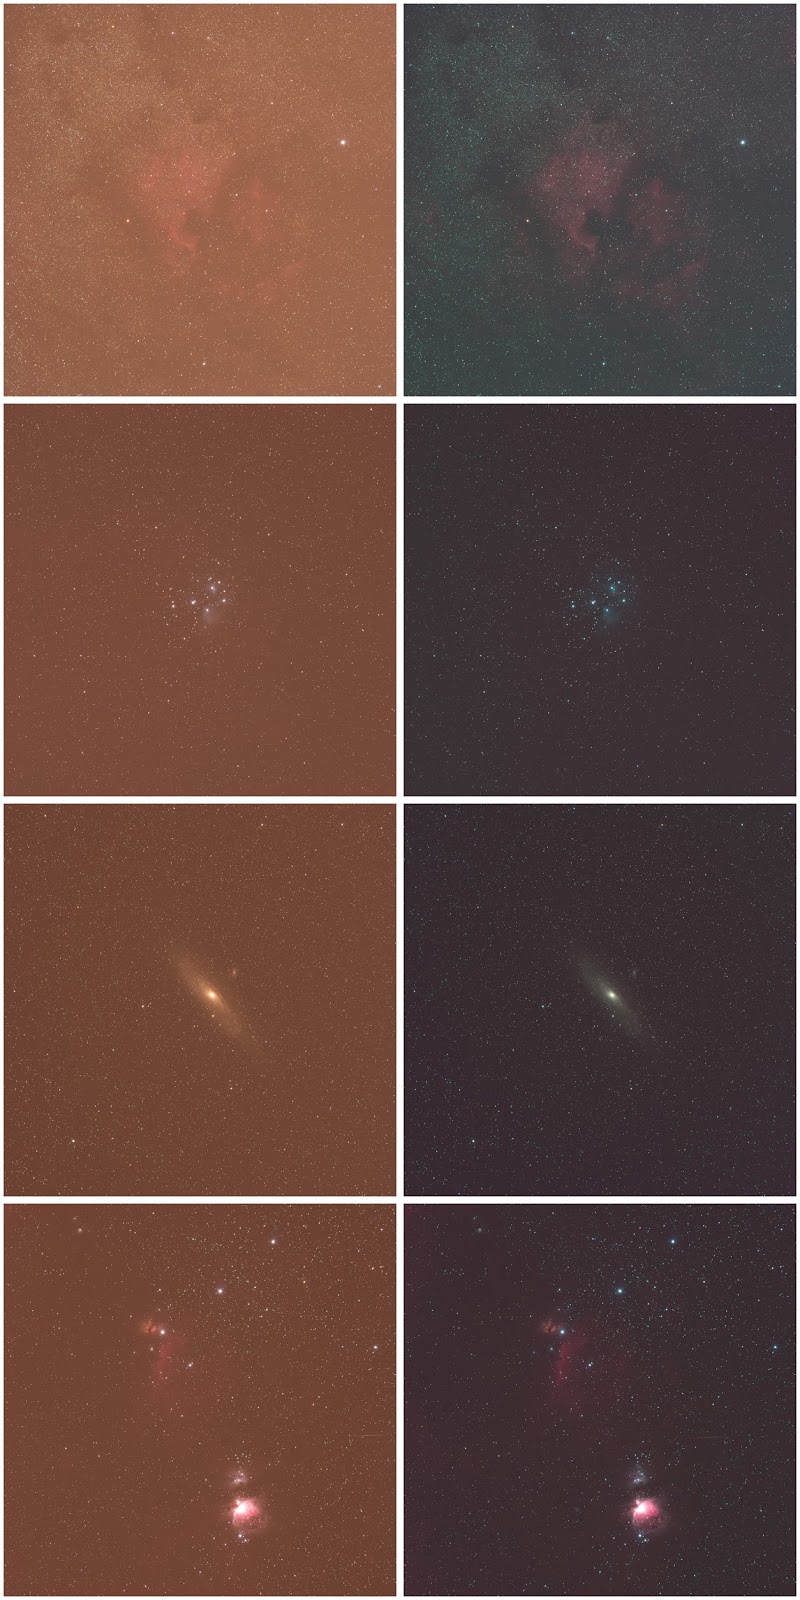 stc-astro-multispectra-before-after.jpg